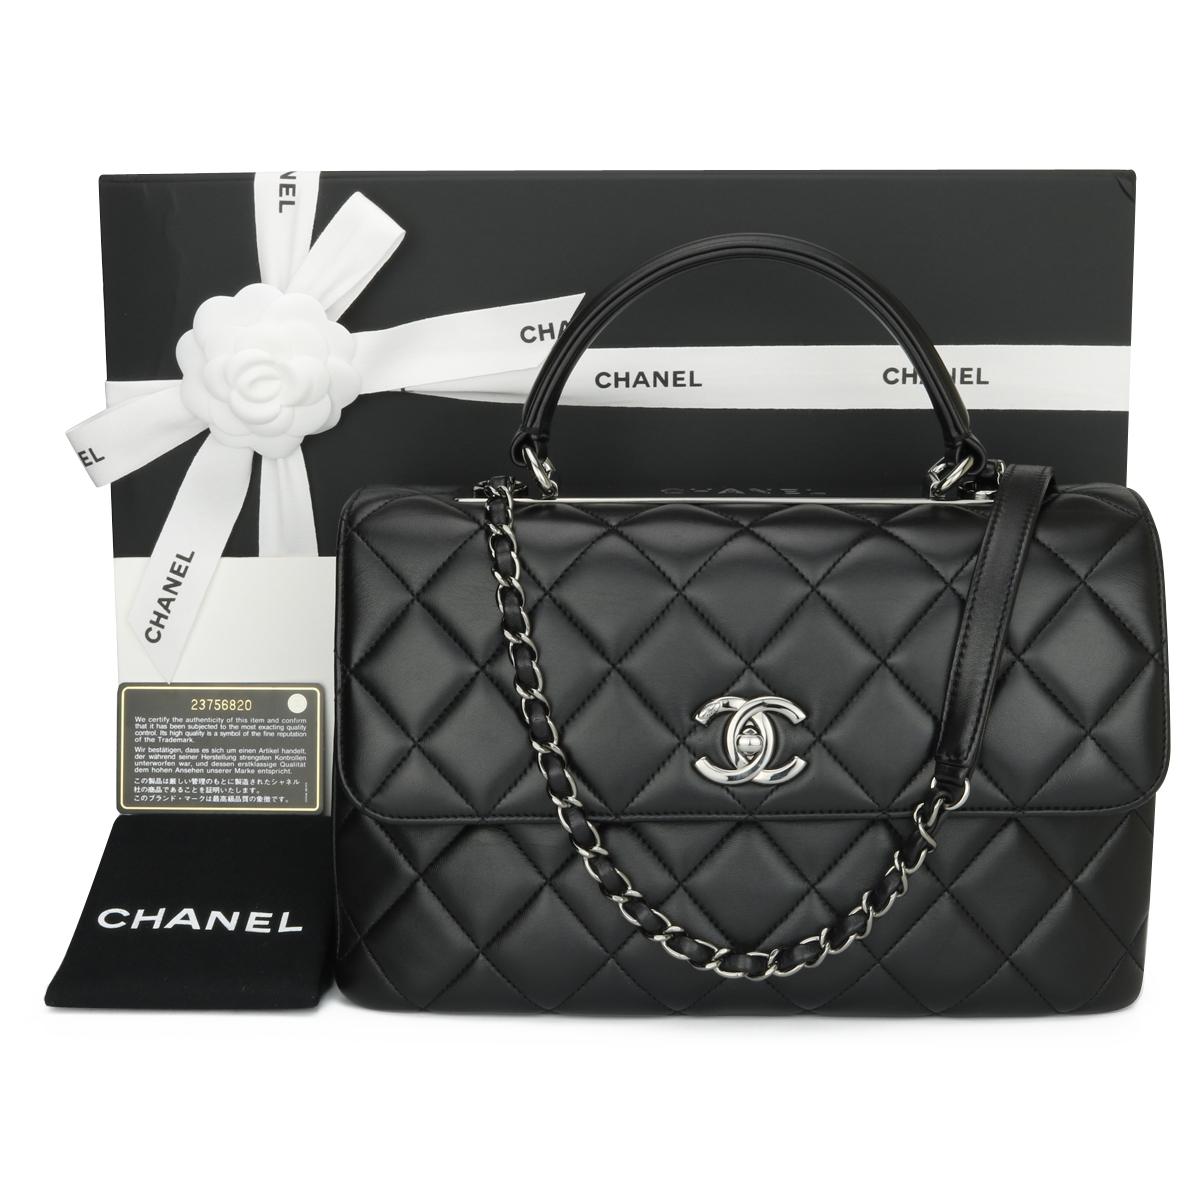 Authentic CHANEL Trendy CC Top Handle Bag Medium Black Quilted Lambskin with Gunmetal Hardware 2017.

This stunning bag is in excellent, the bag still holds its original shape, and the hardware is still very shiny.

This top handle bag is simply